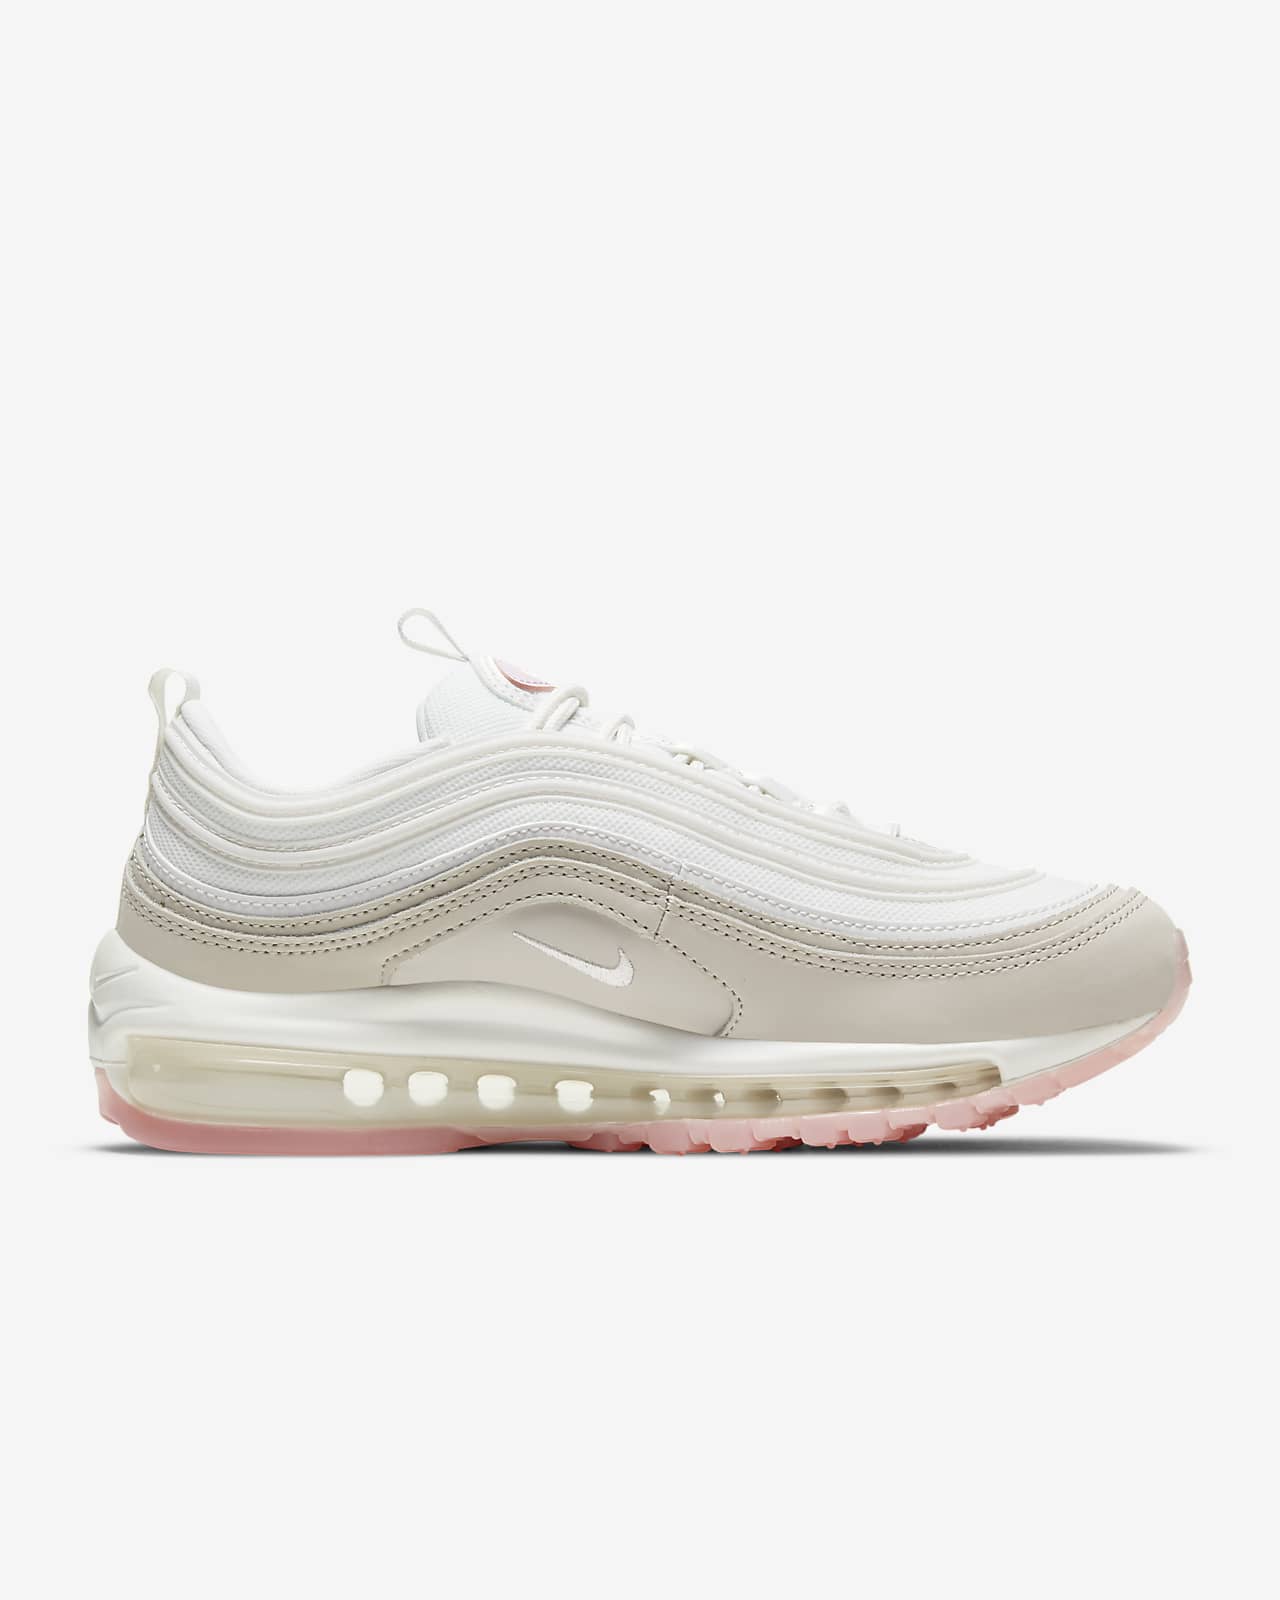 size 10 women's nike air max 97 shoes